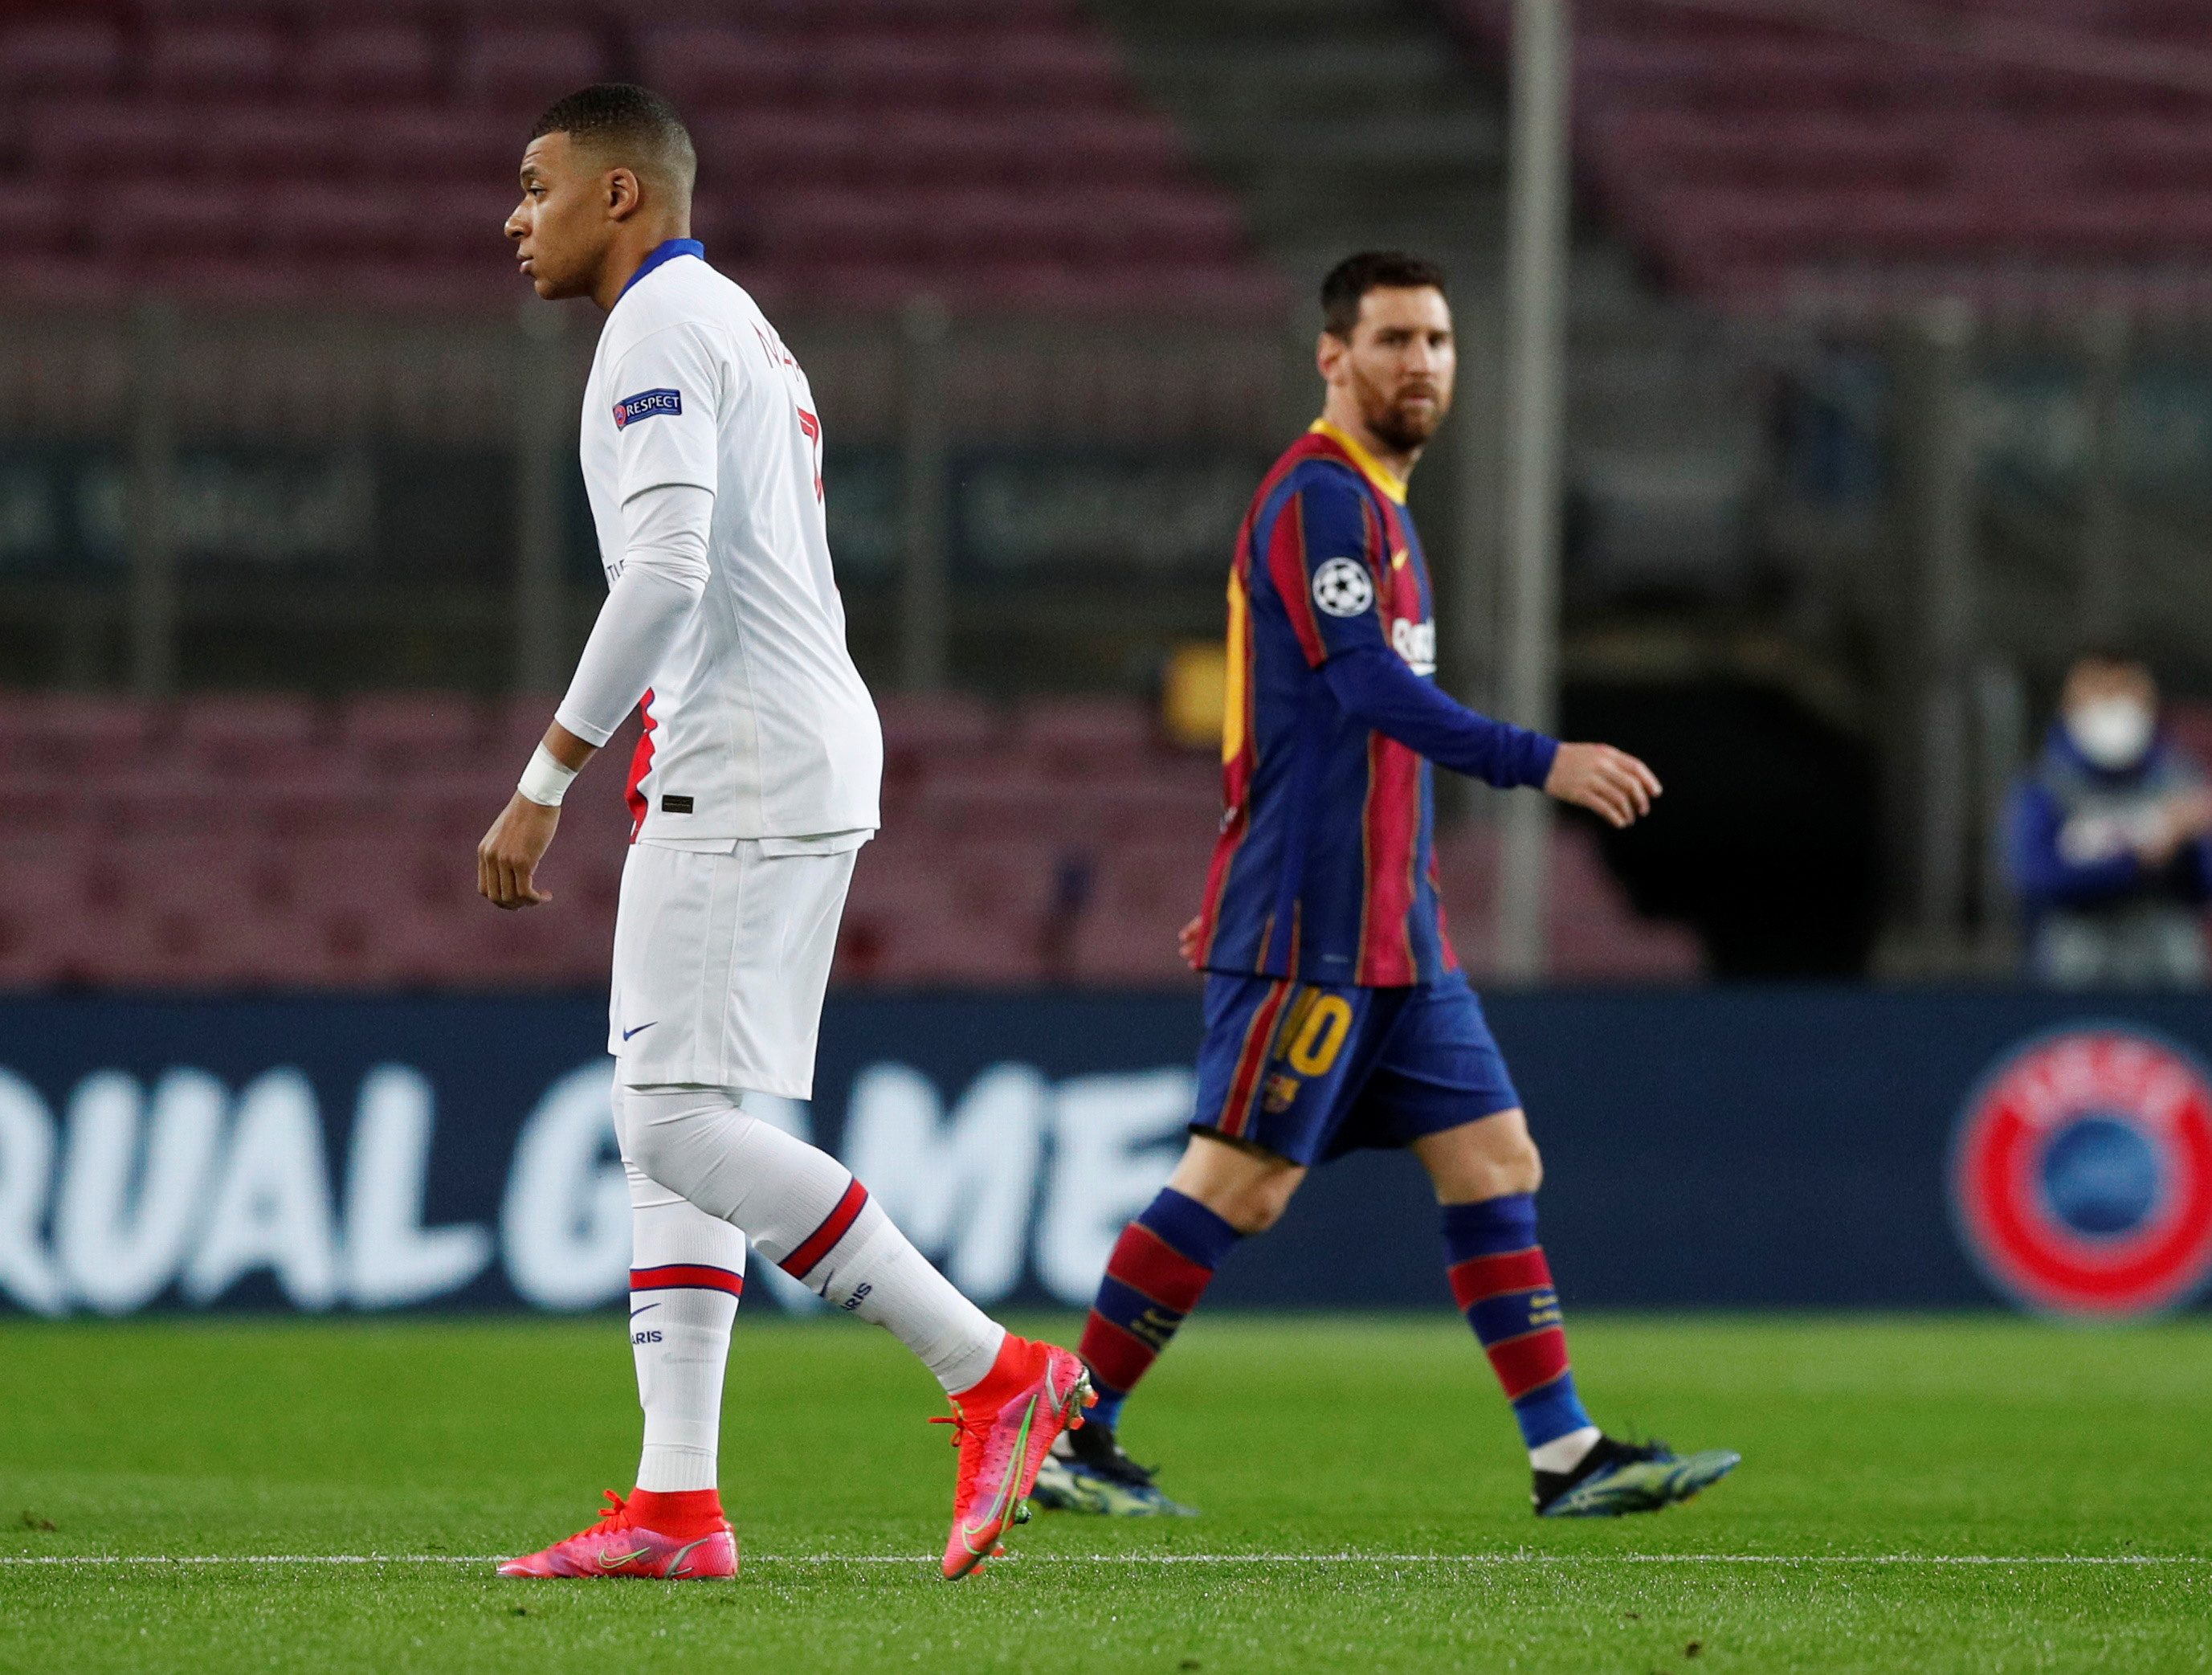 PSG’s Mbappe tipped for greatness after Camp Nou masterclass